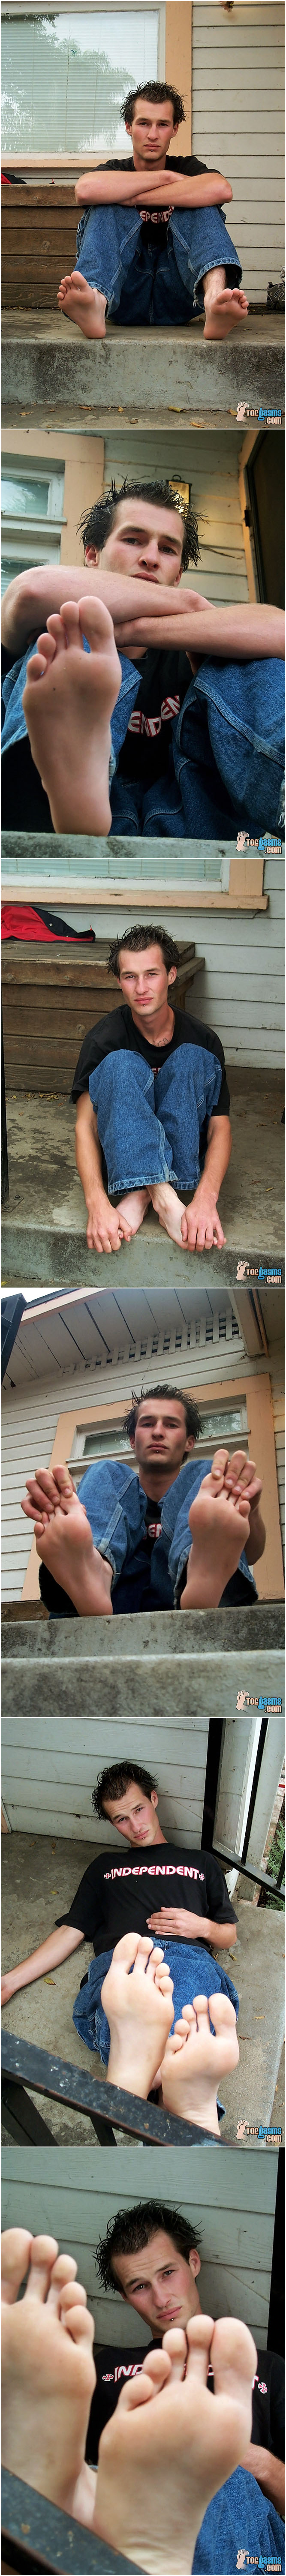 Cute amateur guy shows off his bare feet